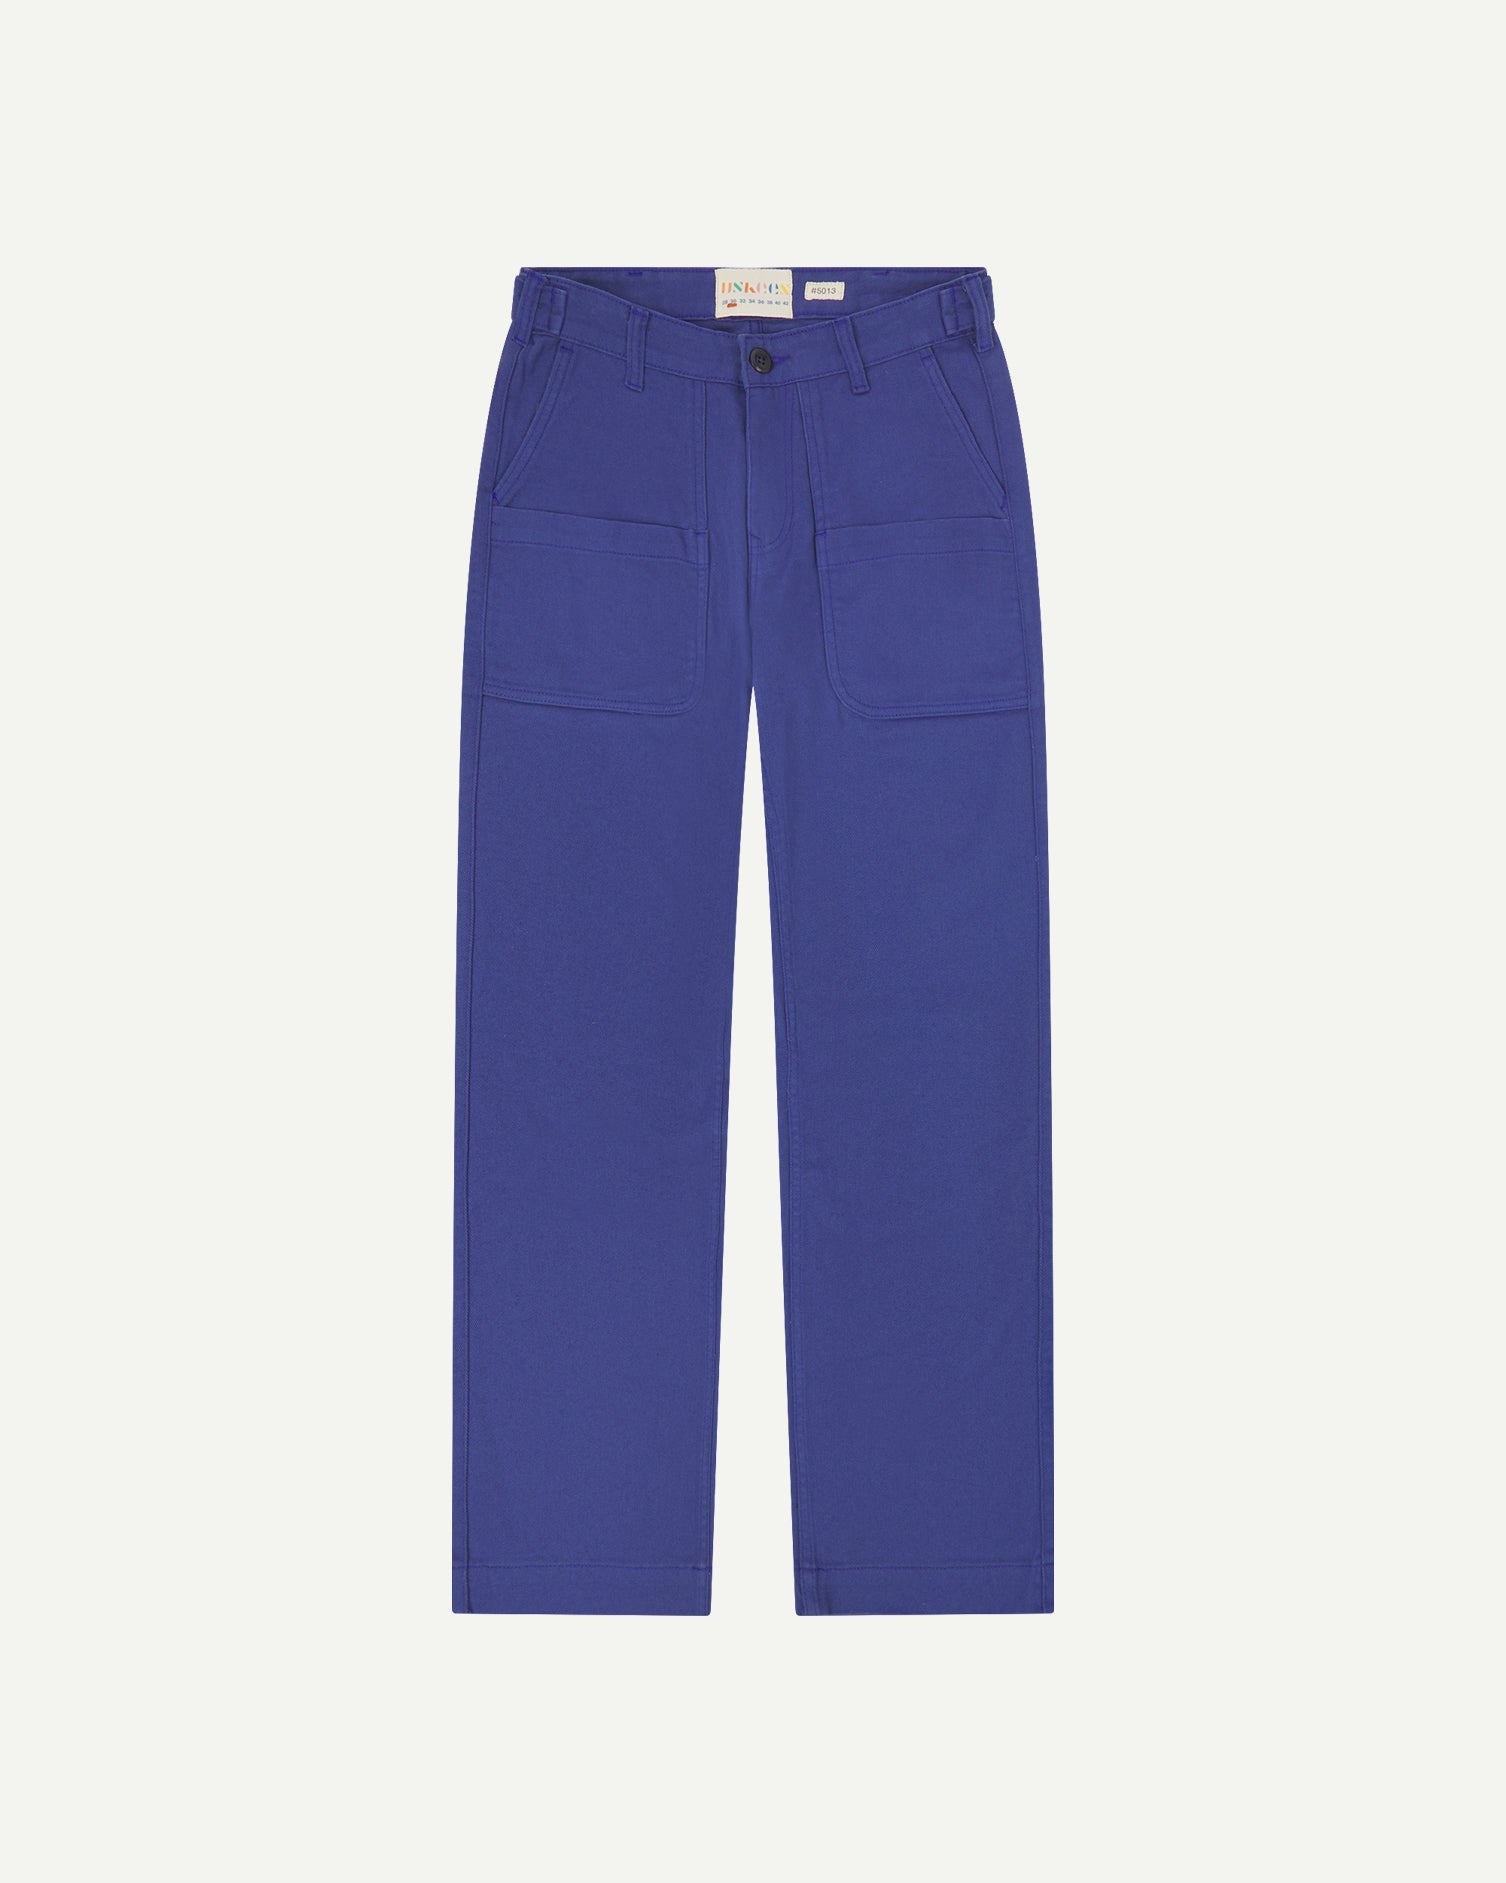 Flat shot of uskees ultra blue drill trousers for men showing label at waistband